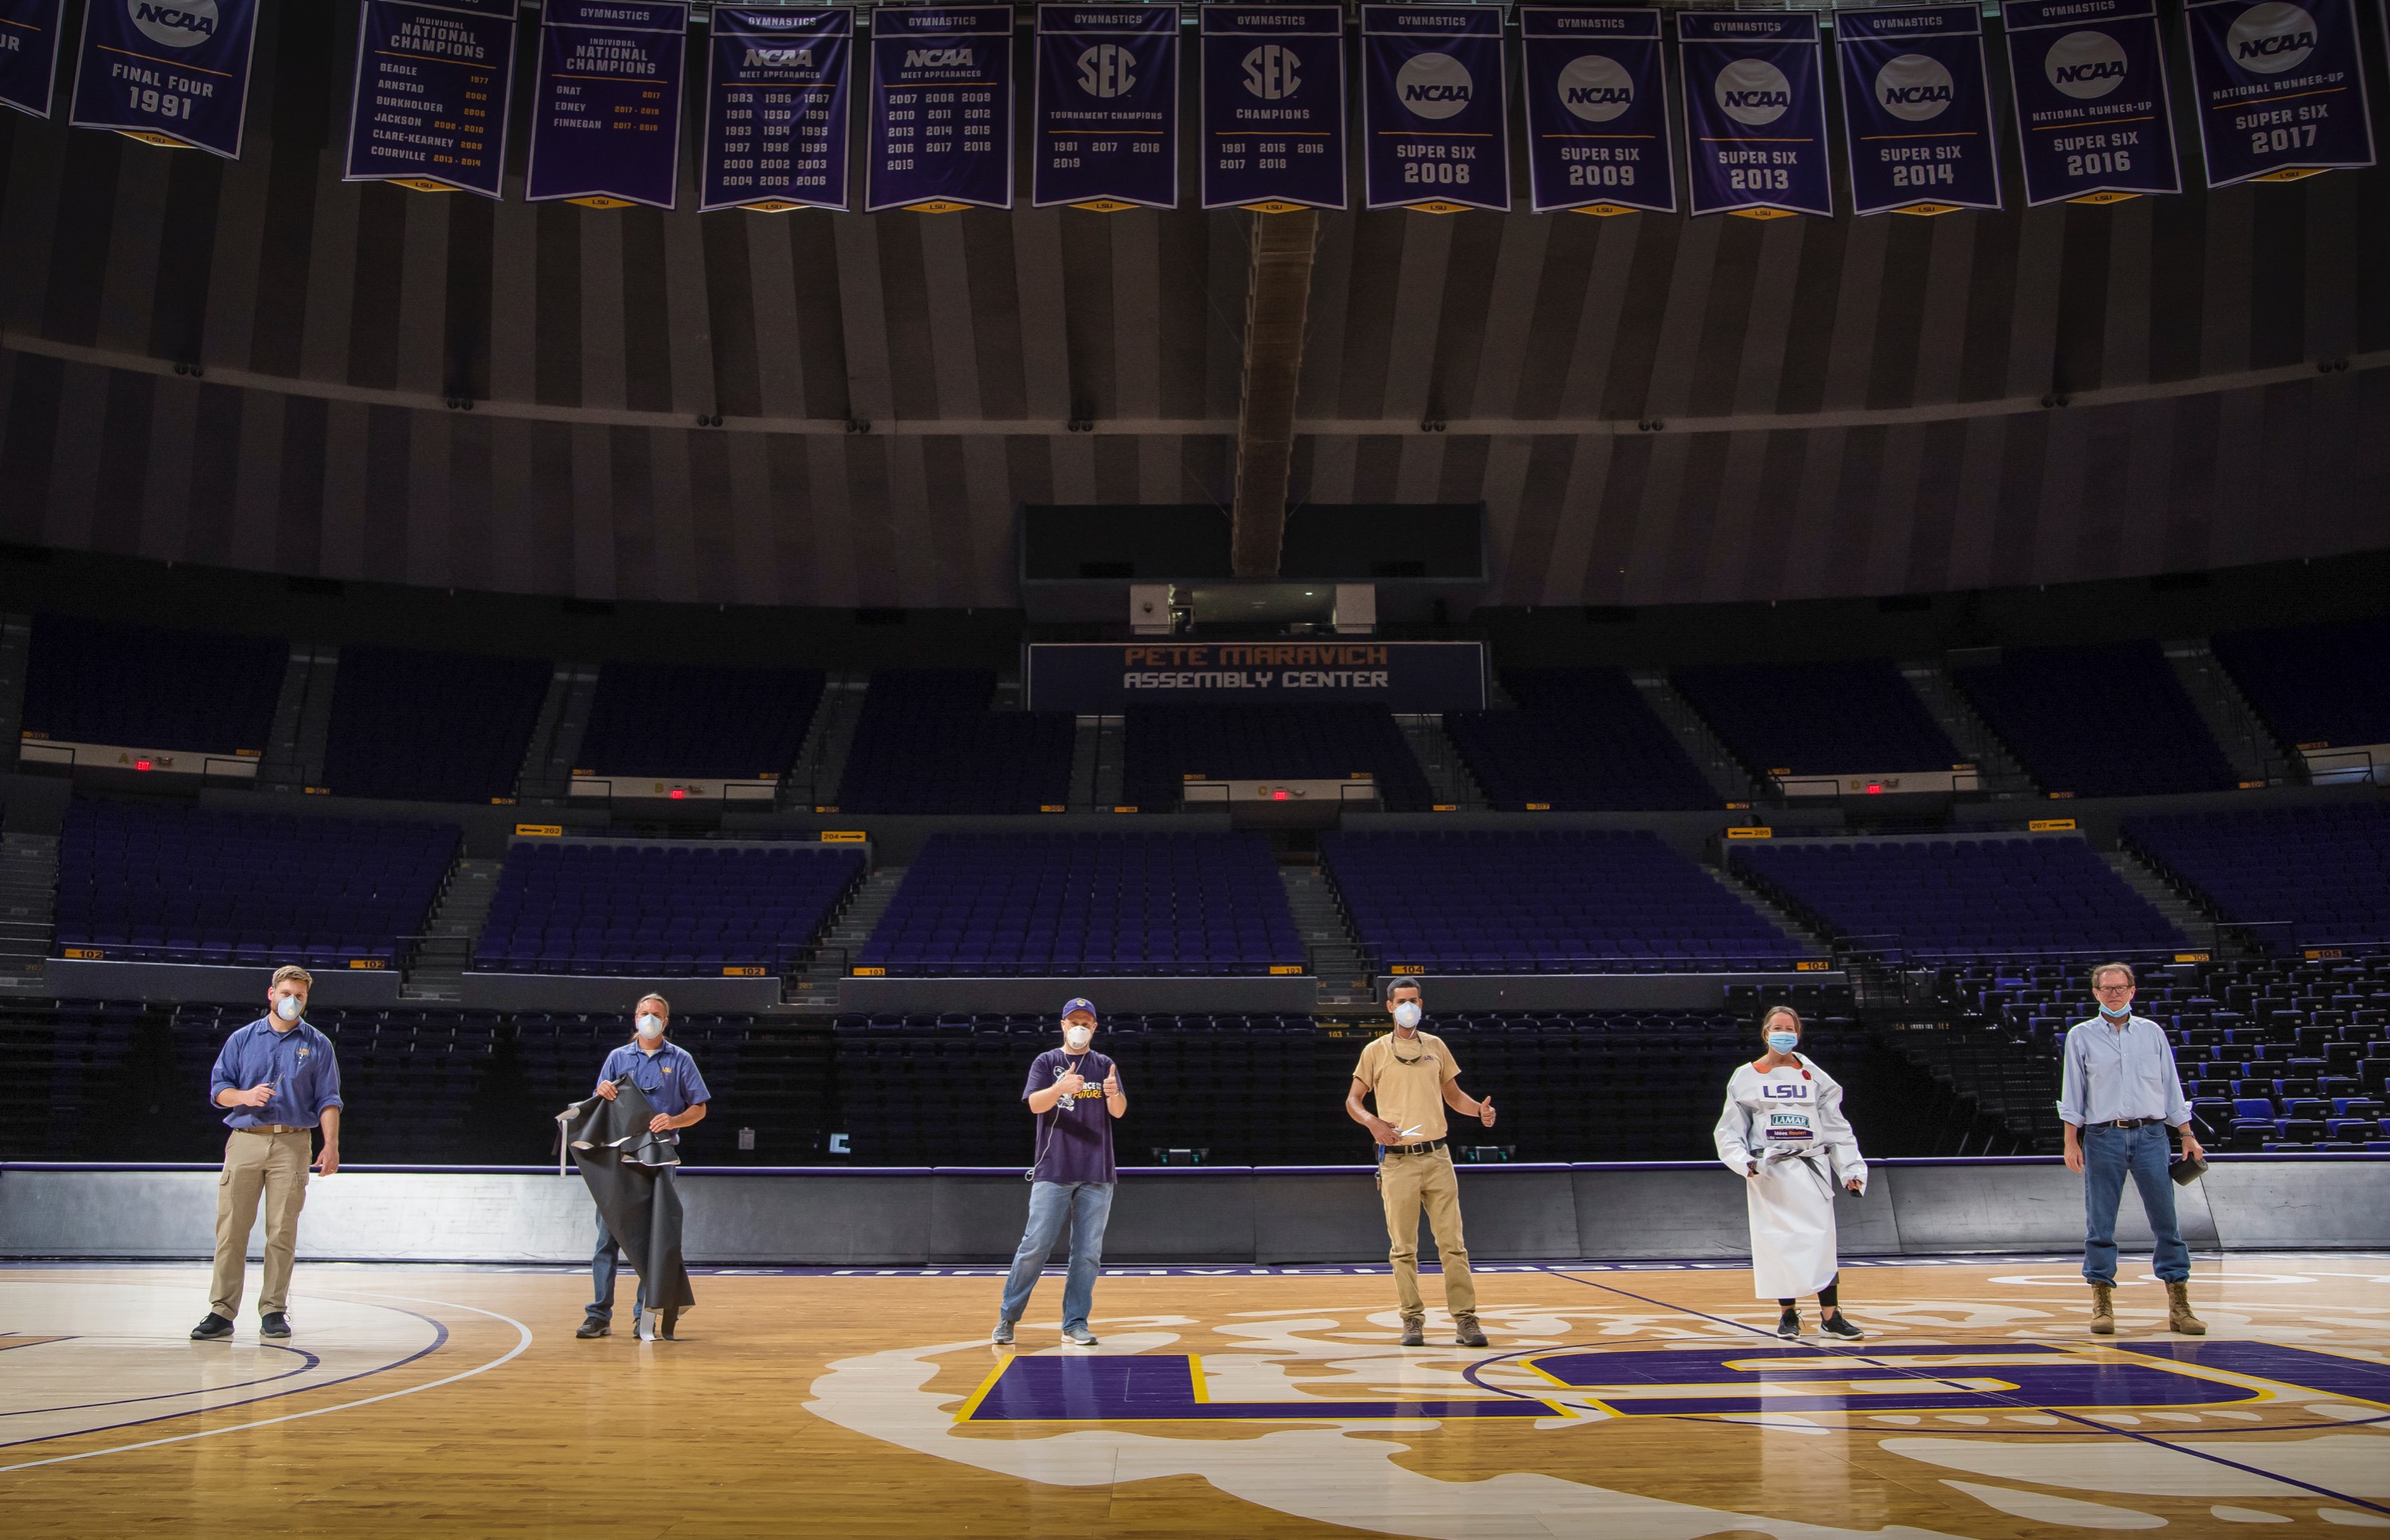 LSU employees create PPE inside the PMAC